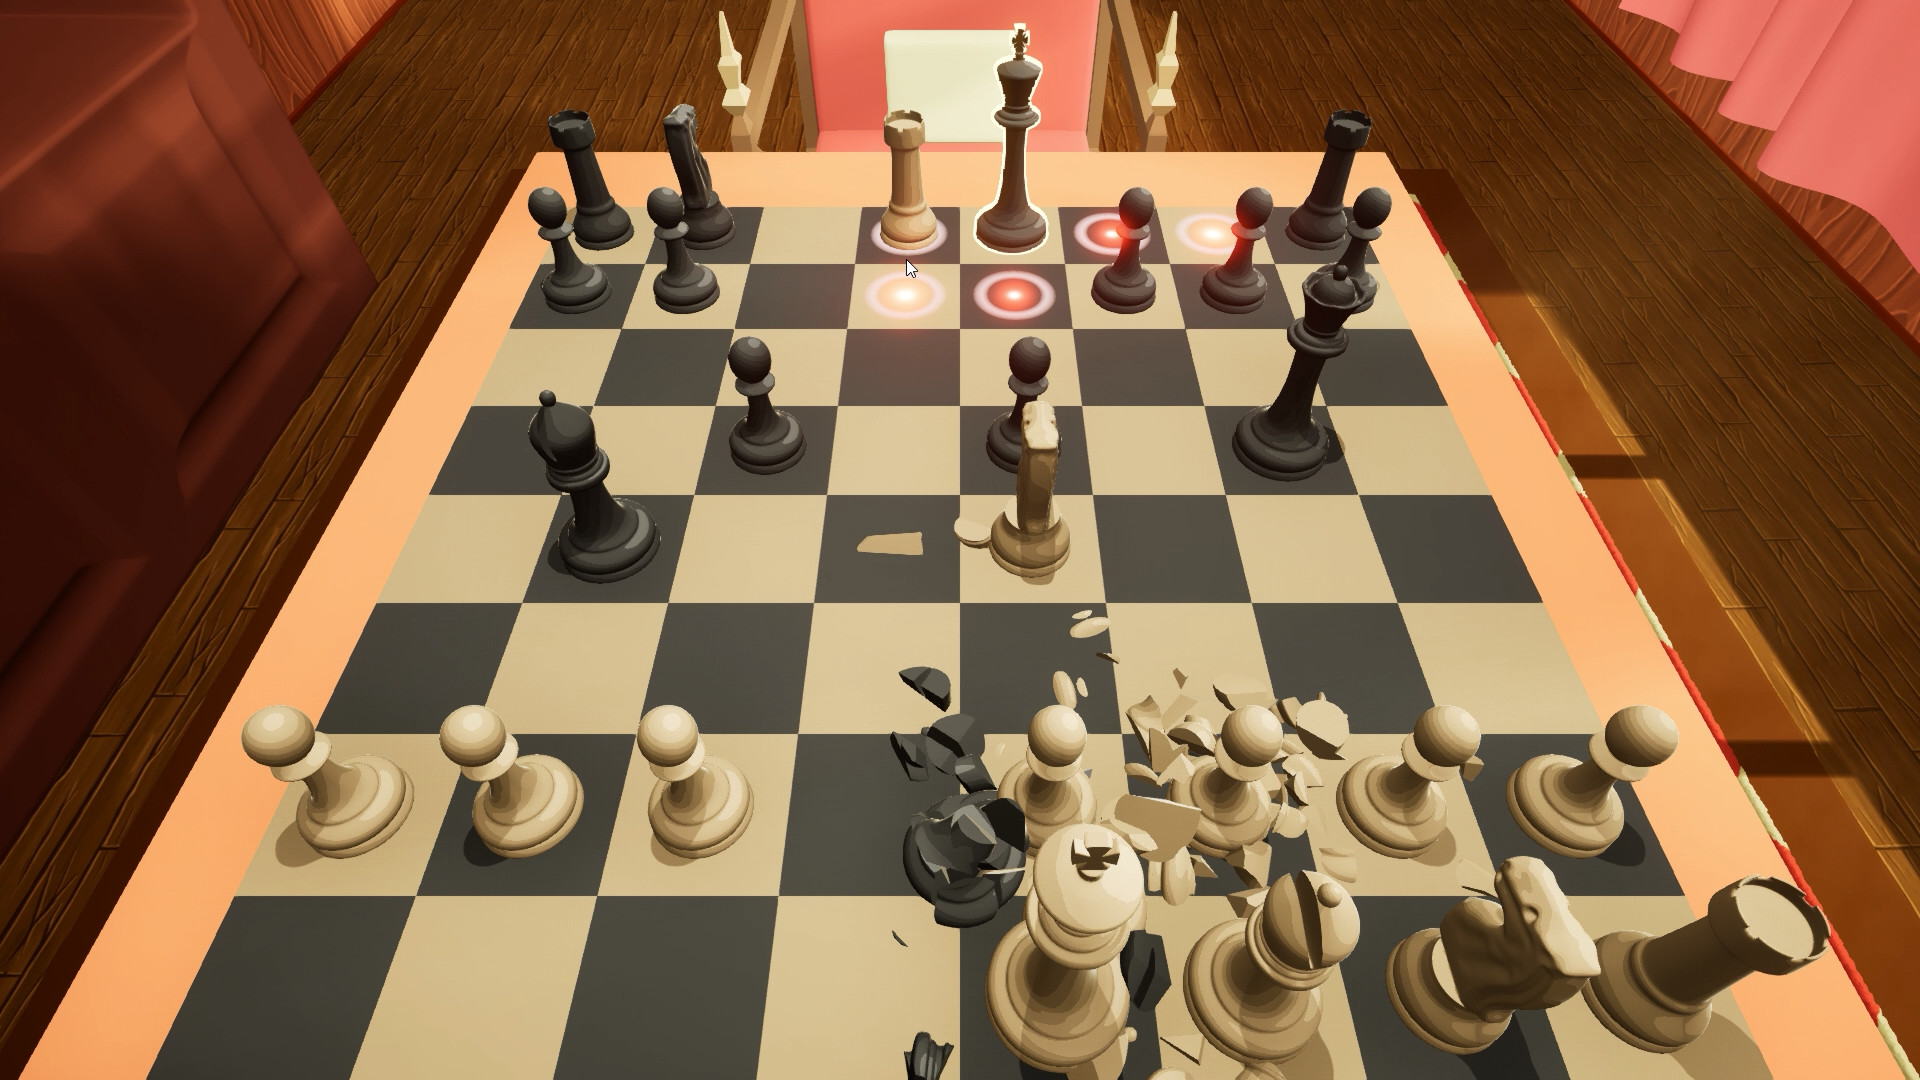 FPS Chess - Battle a friend in this fast paced 1v1 class-based